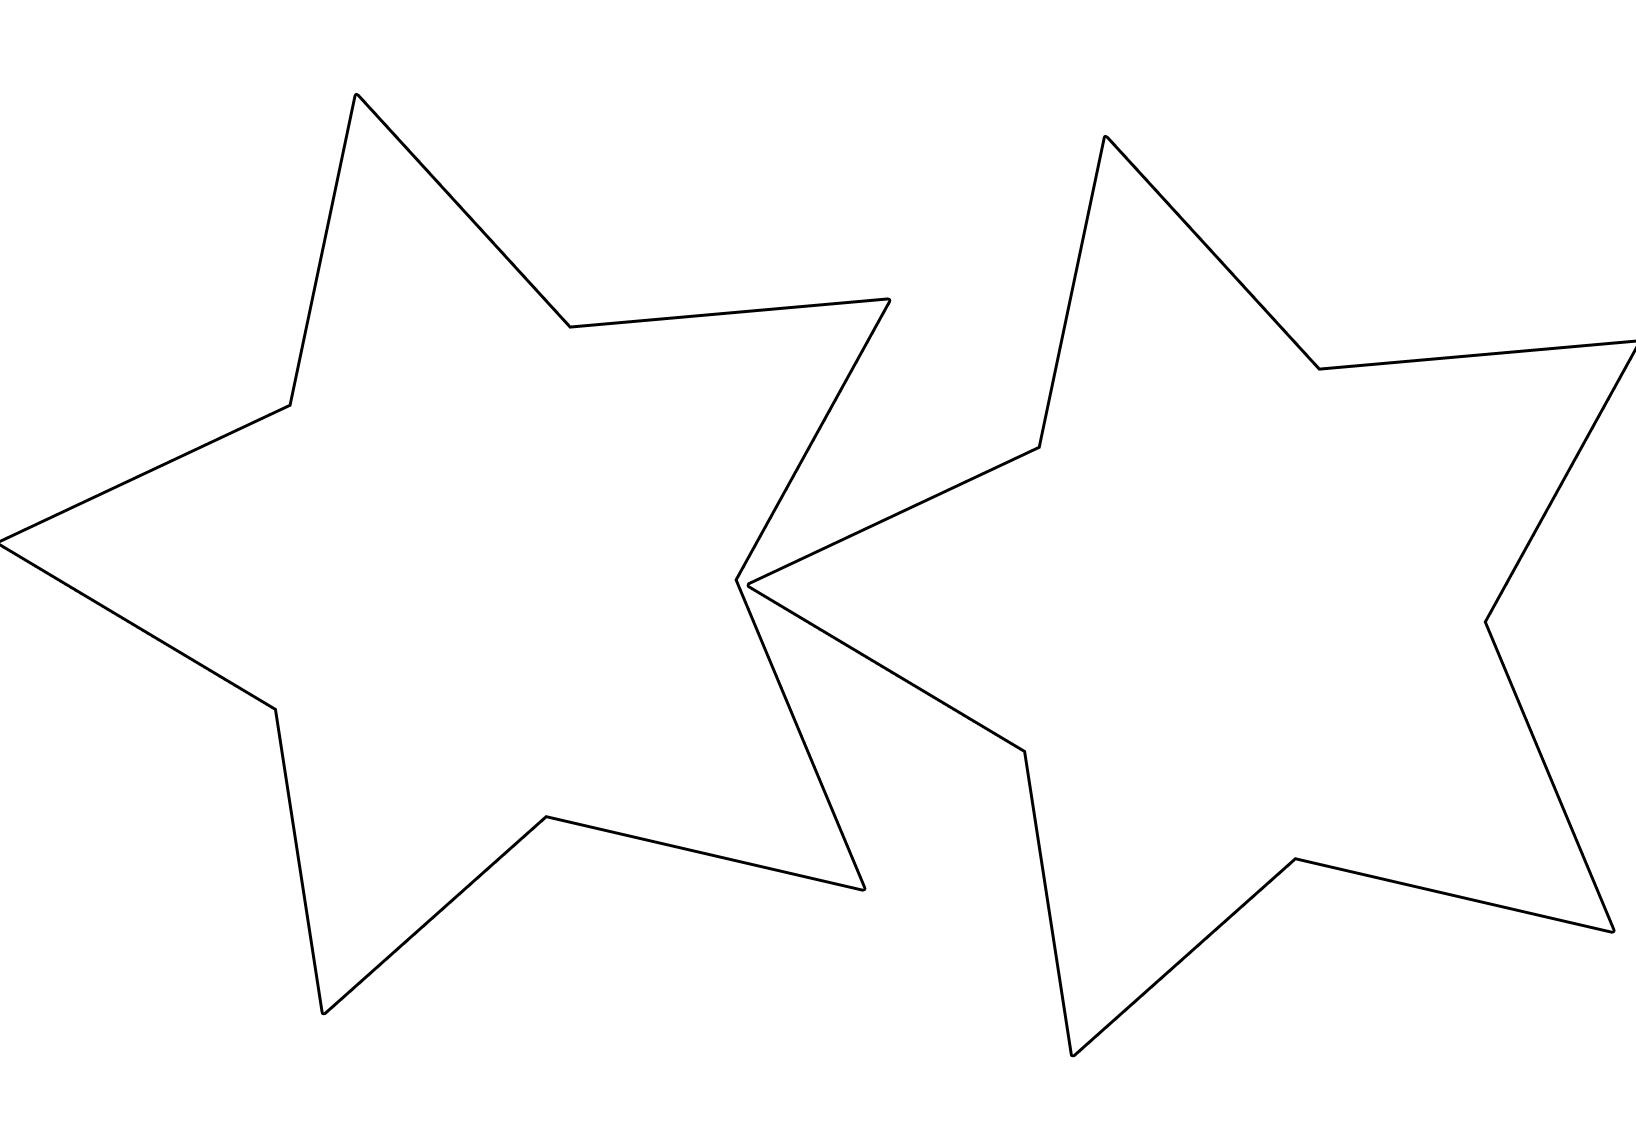 Small Star Template - ClipArt Best